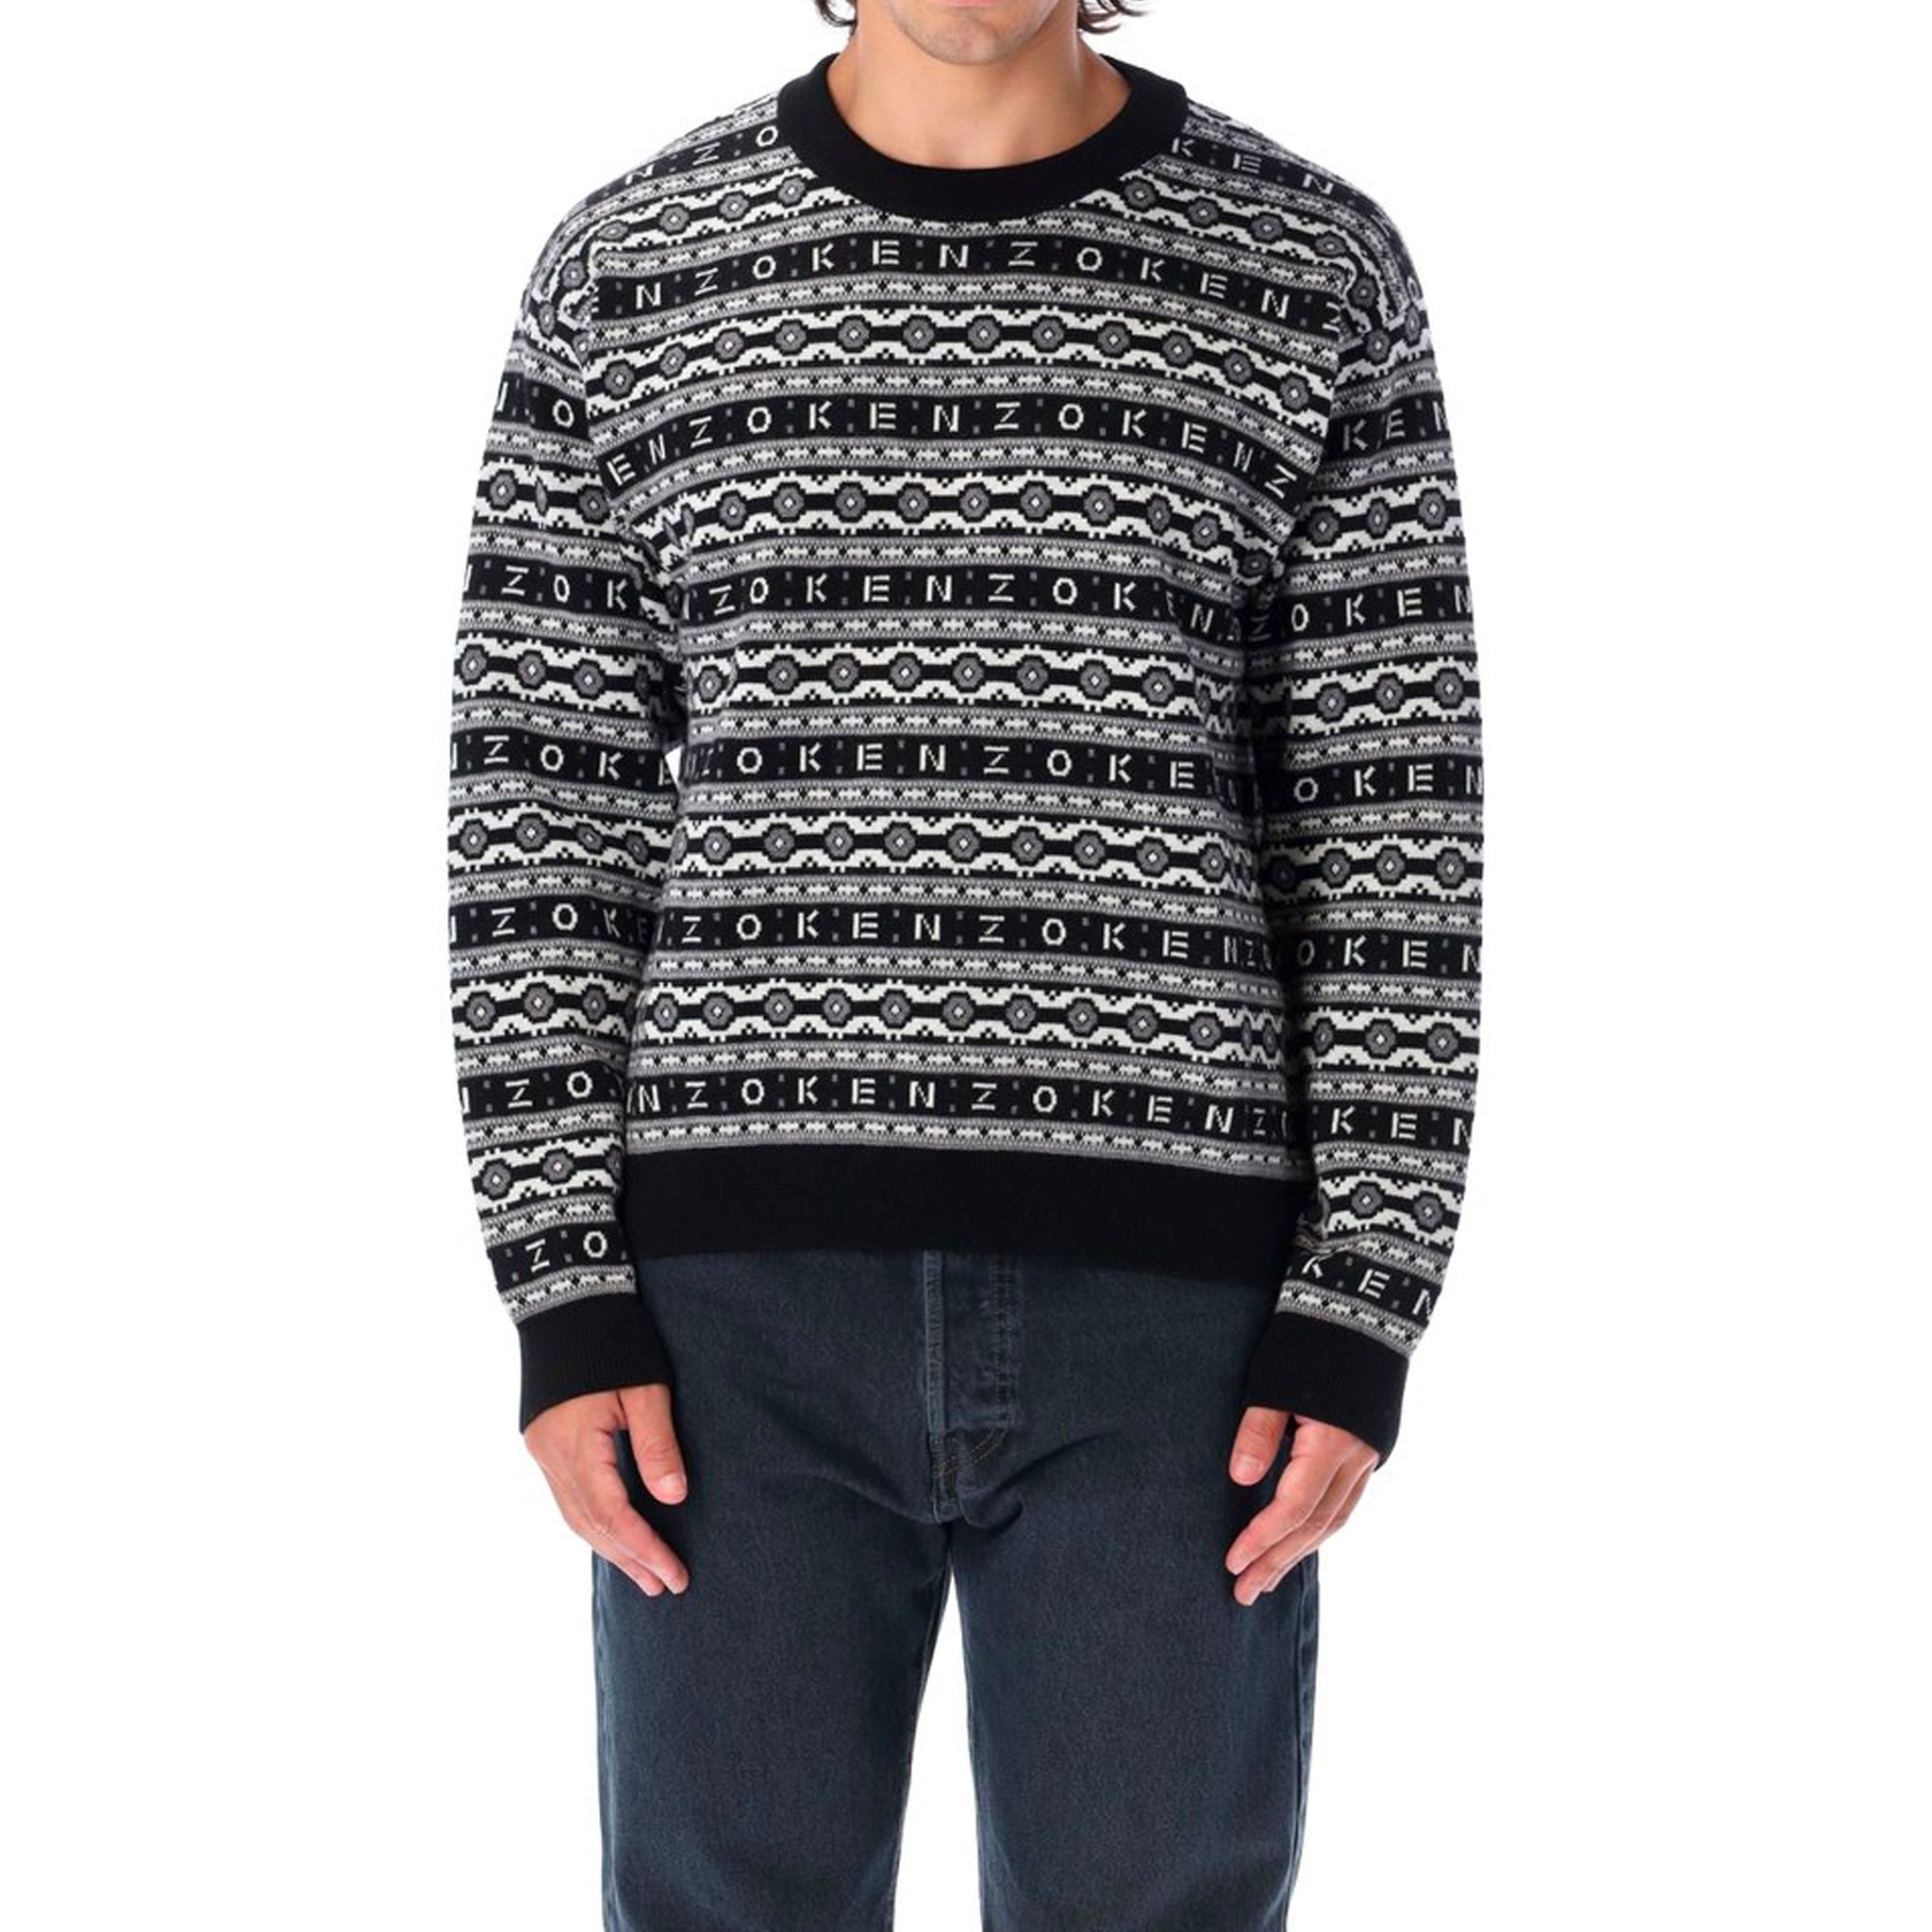 KENZO-OUTLET-SALE-Kenzo-Striped-Wool-Sweater-Strick-ARCHIVE-COLLECTION-2.jpg